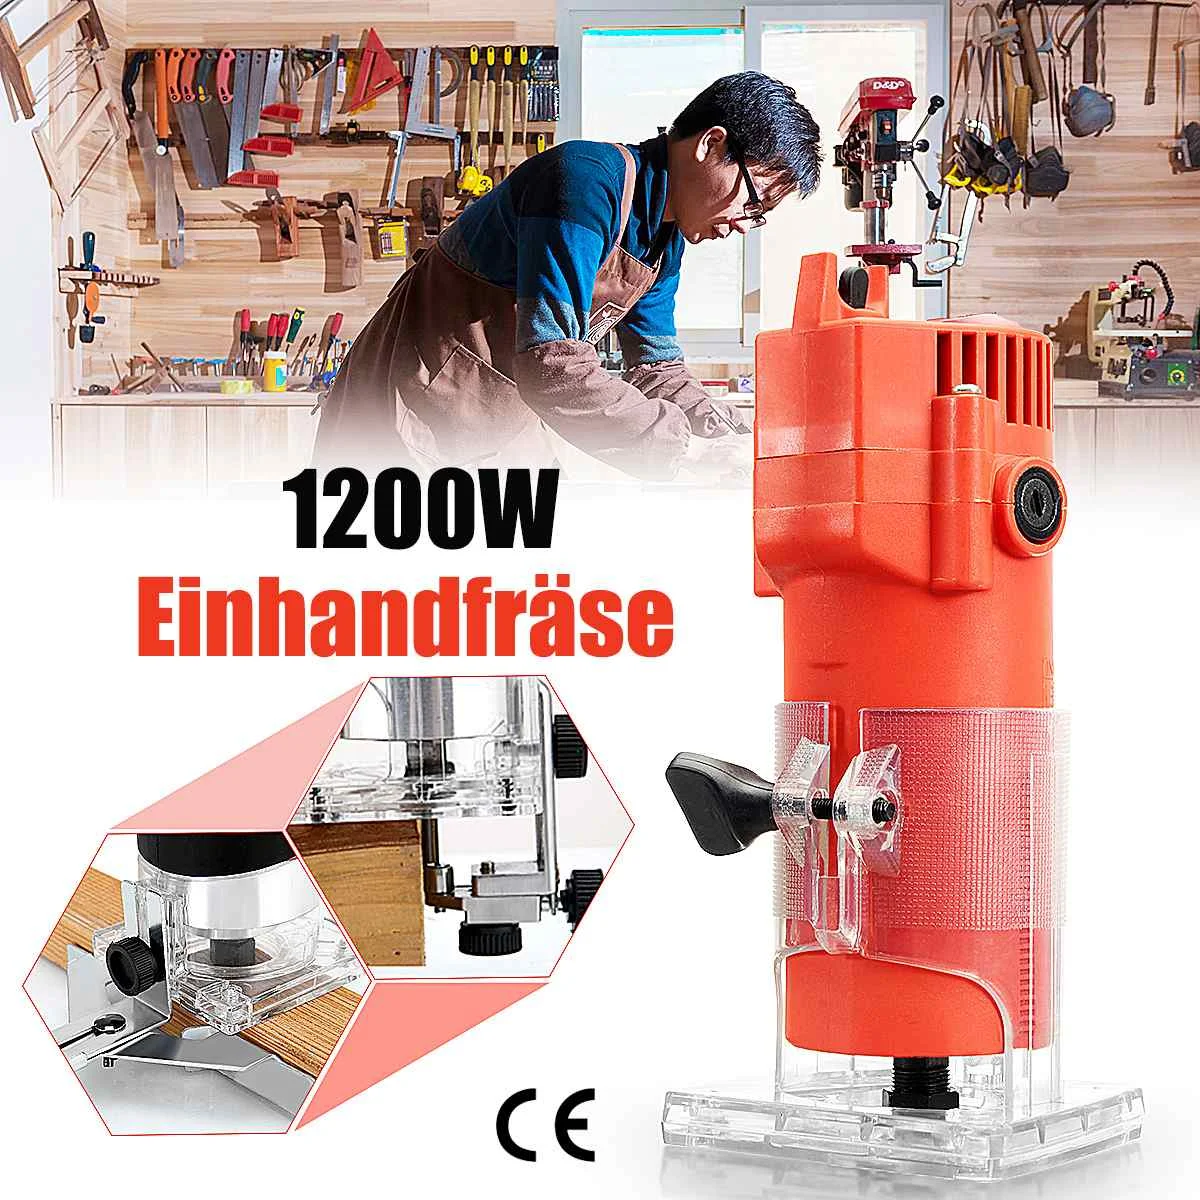 

450W/1200W 1/4" 50HZ 220V Corded Electric Hand Trimmer Wood Laminator Router Joiners Tools Transparent Base DIY Lift Knob